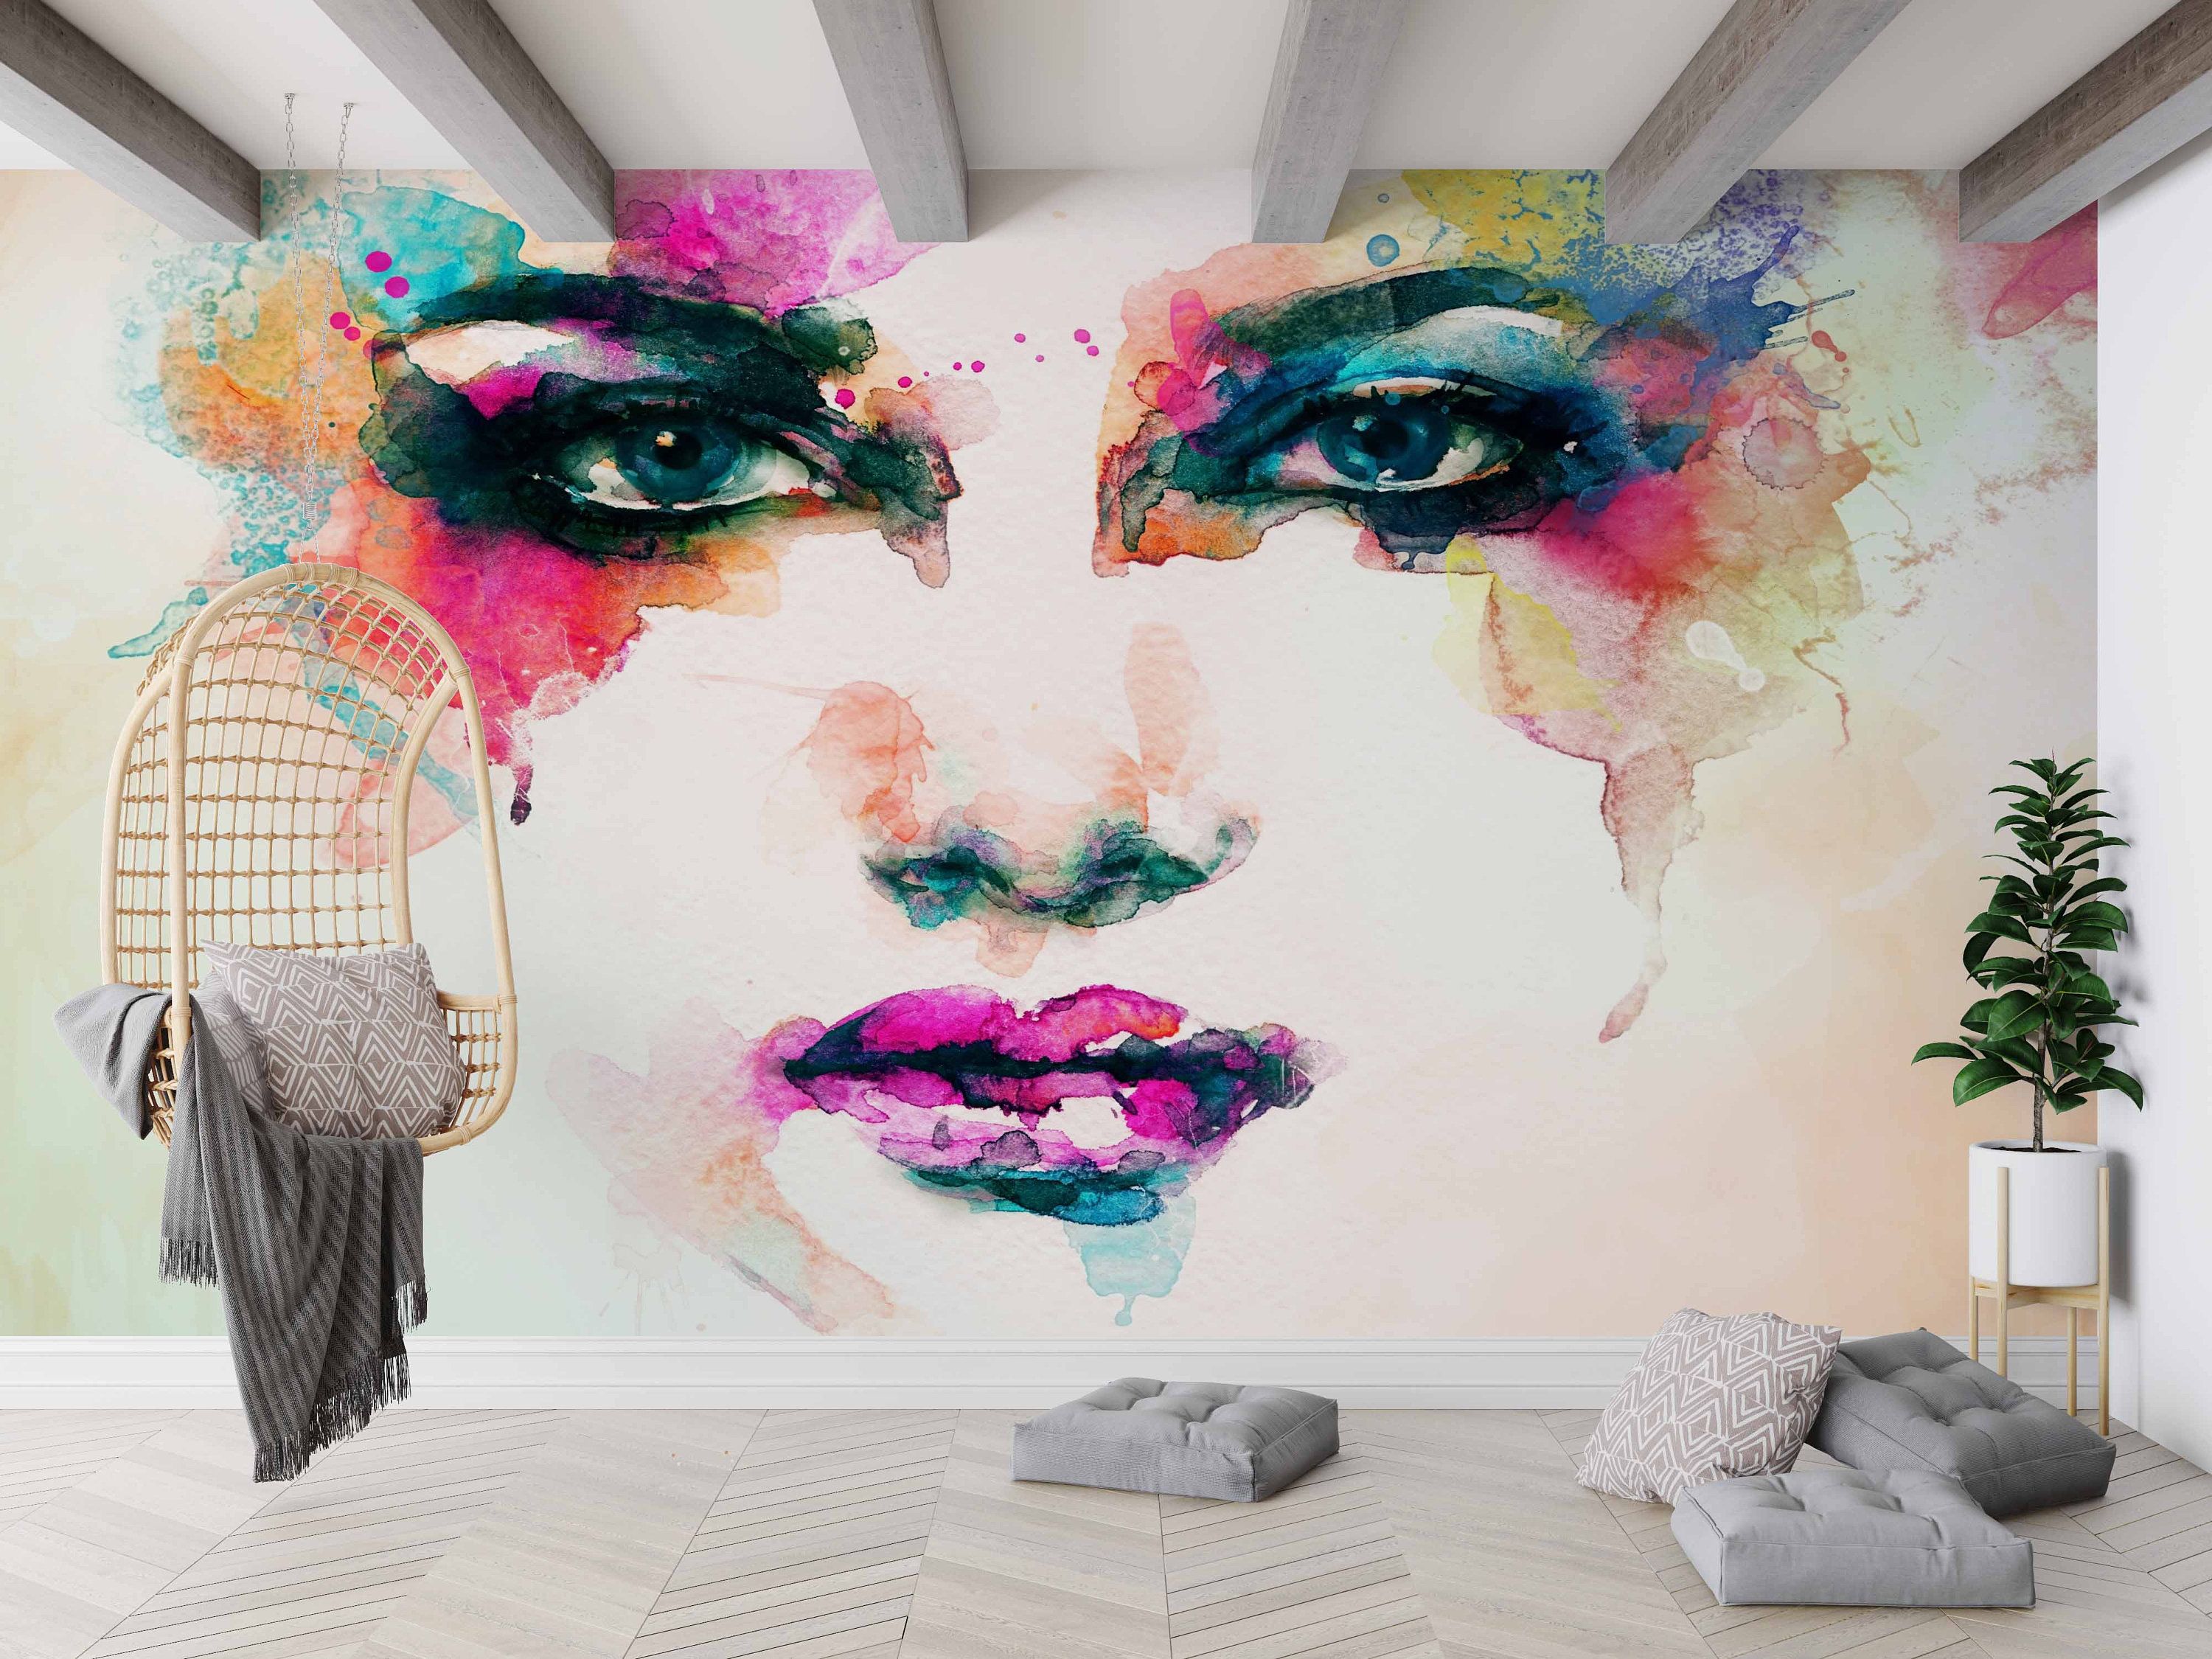 Colorful Wallpaper Abstract Woman Wall Art Face Wall – Etsy New Zealand With Regard To Women Face Wall Art (View 13 of 15)